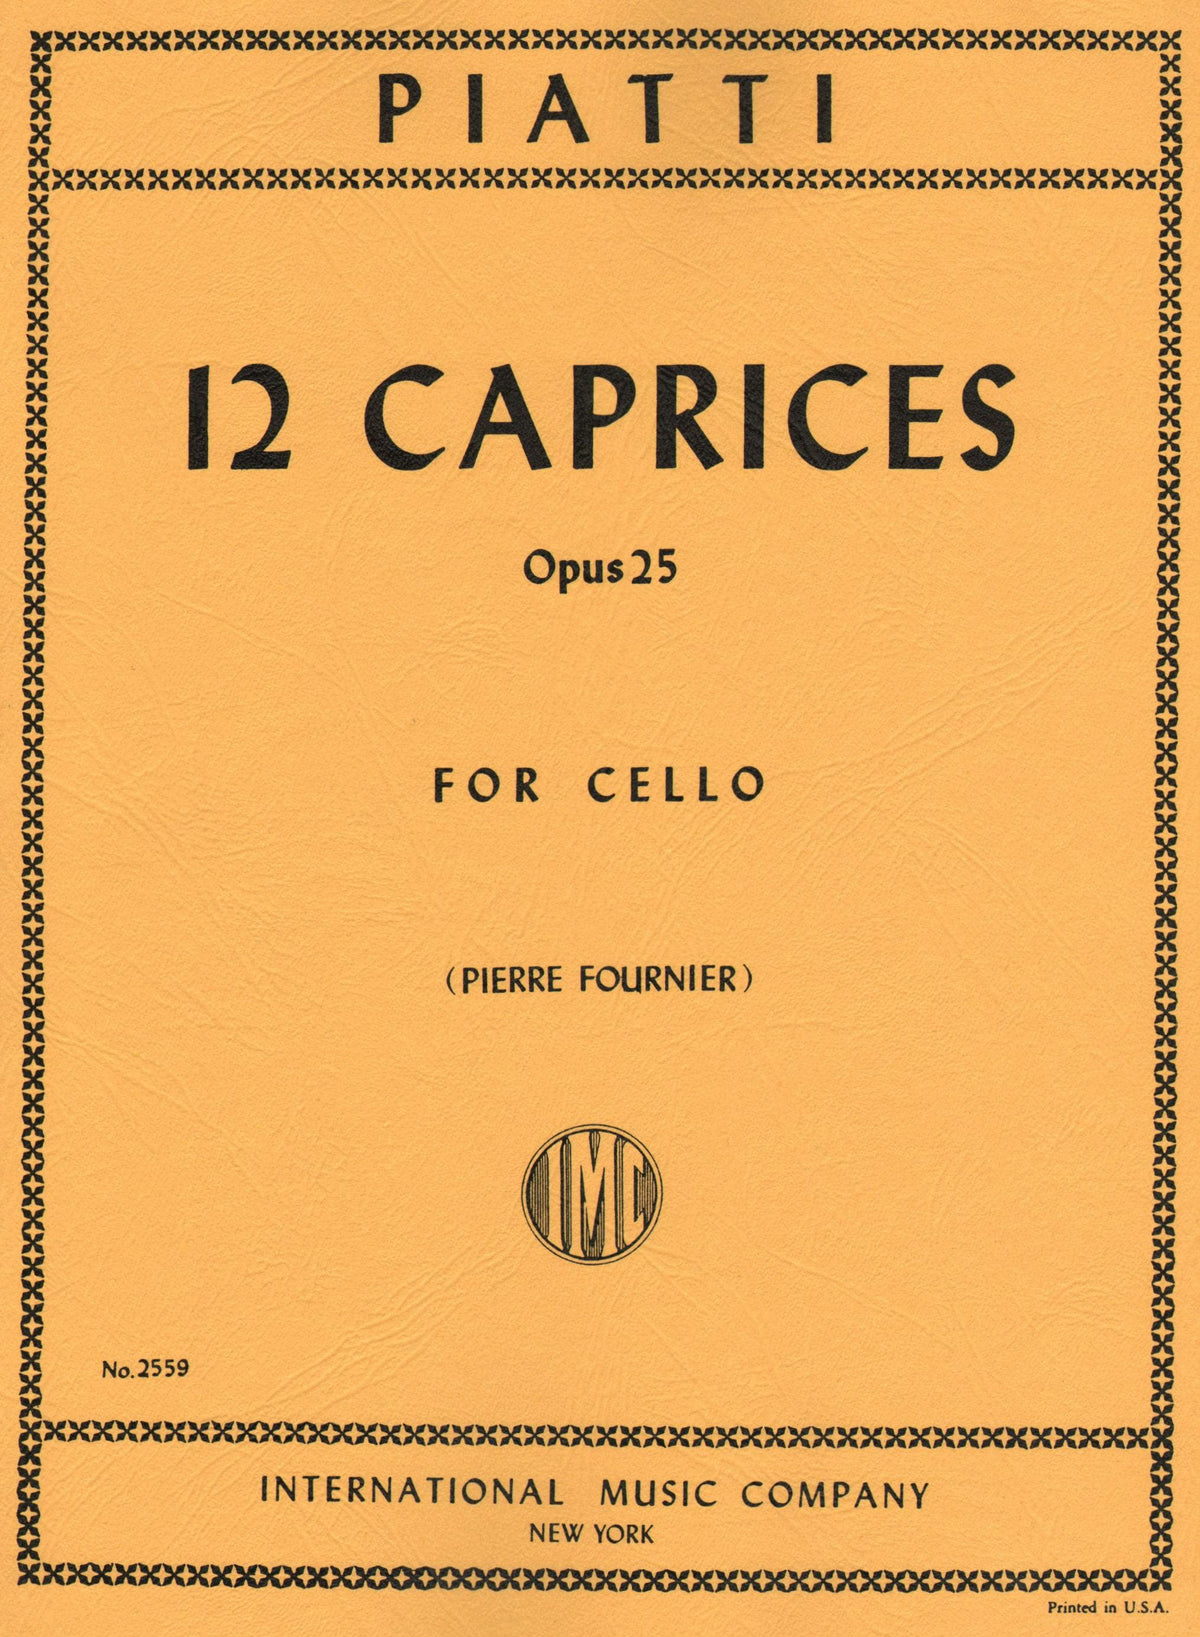 Piatti, Alfredo - 12 Caprices Op 25 For Cello Edited by Fournier Published by International Music Company